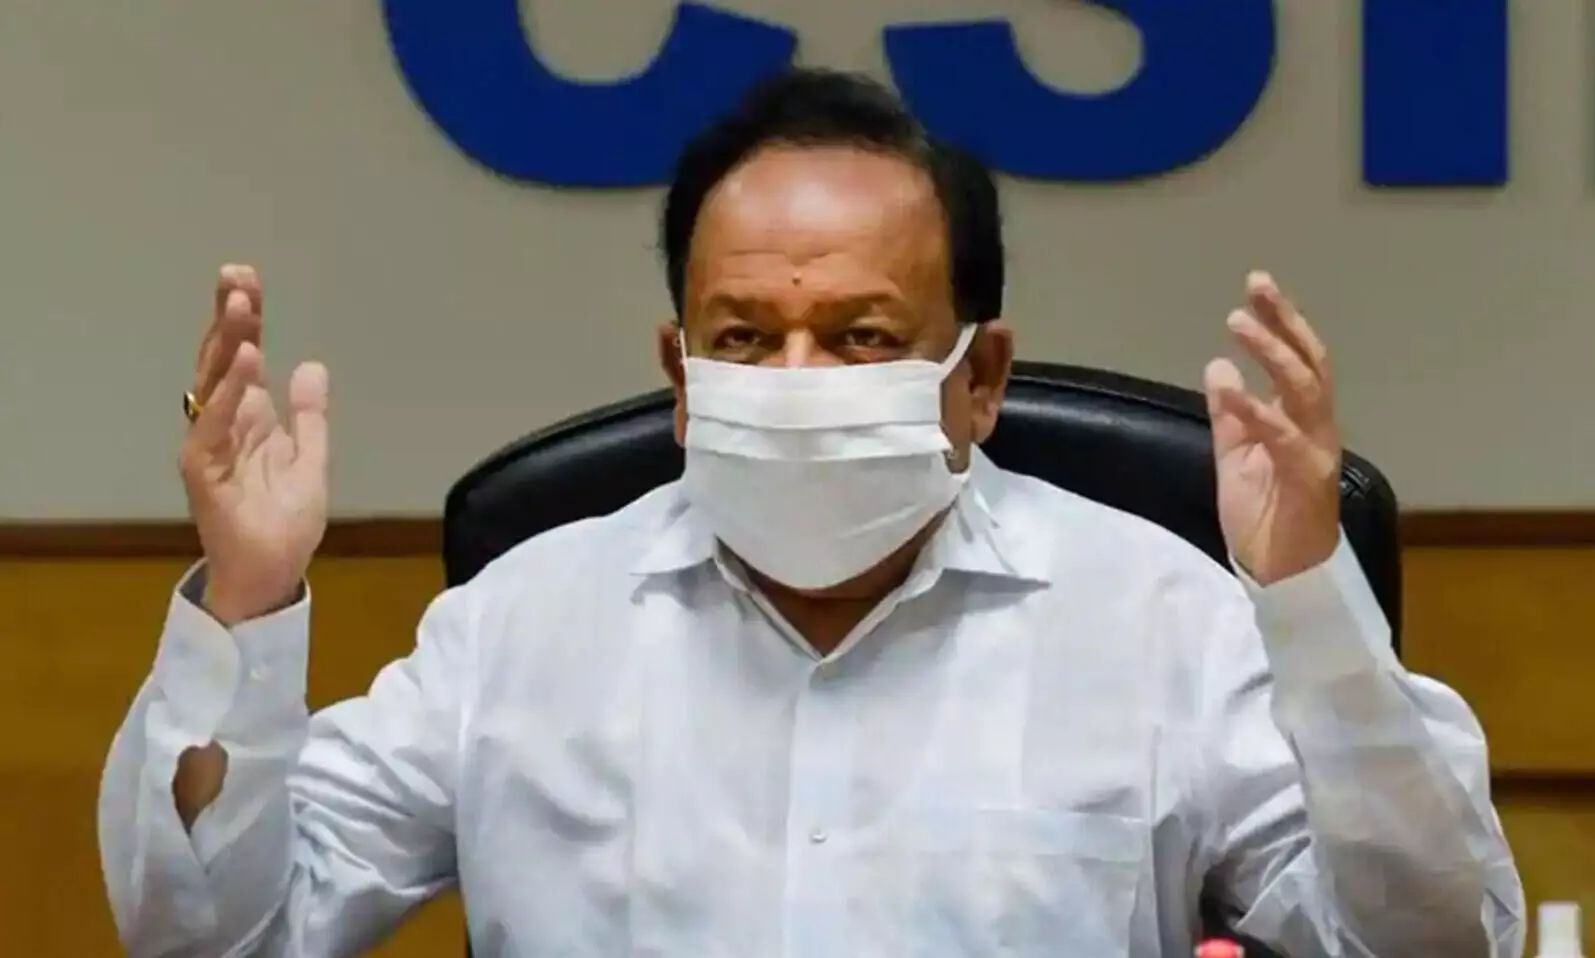 No official statements regarding Covid vaccine has been made, says Health Minister Dr Harsh Vardhan